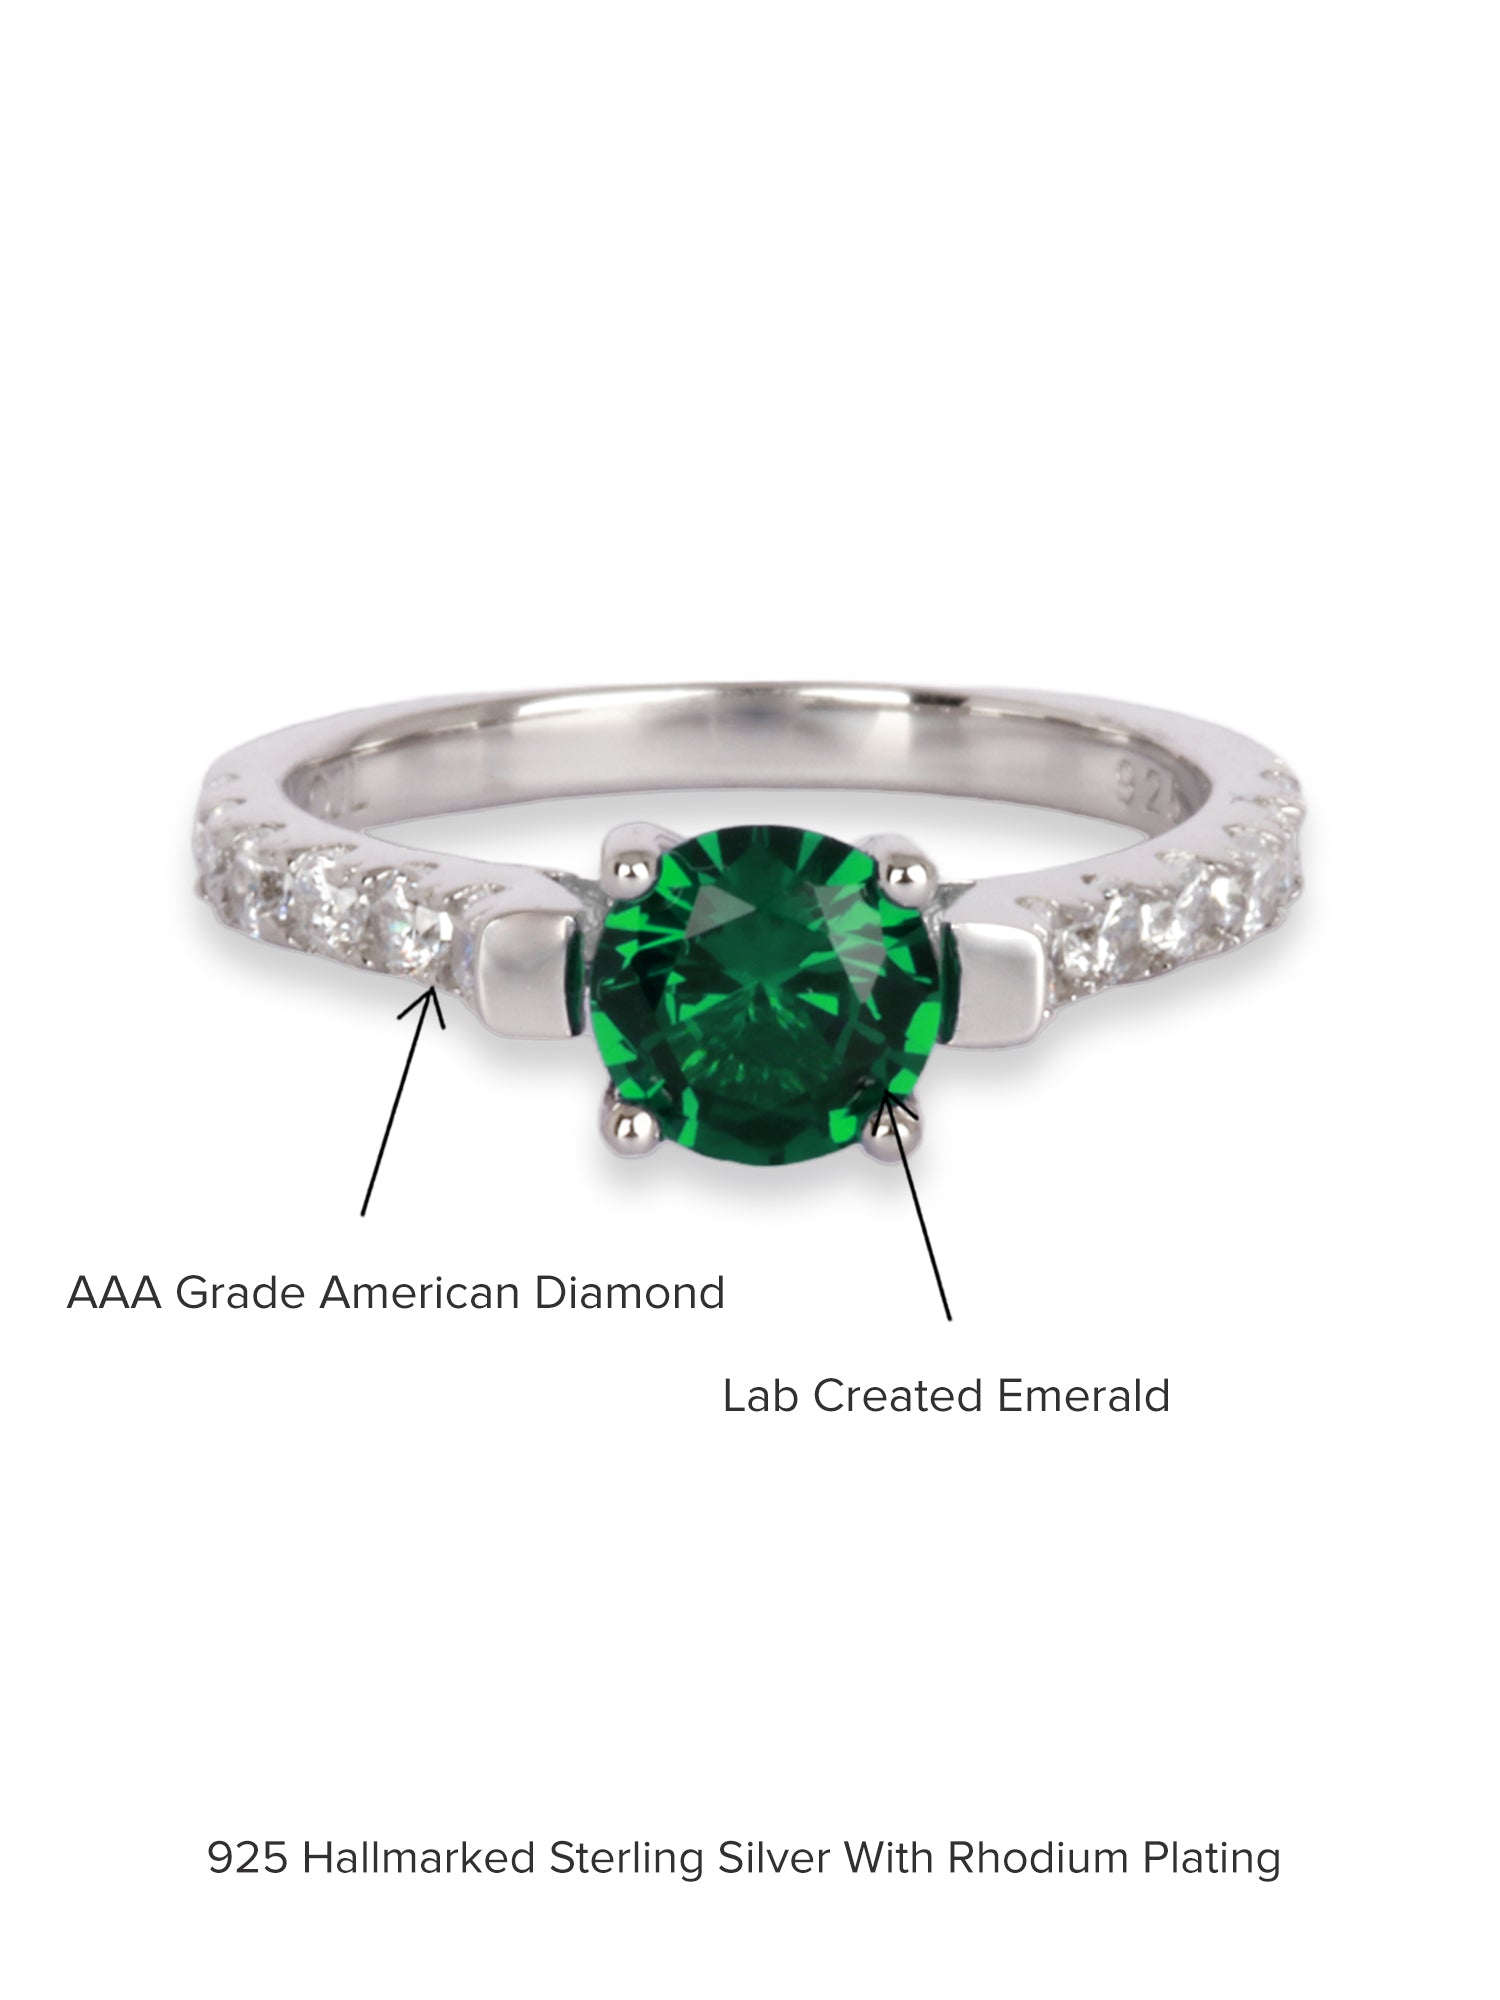 ORNATE JEWELS EMERALD GREEN SOLITAIRE SILVER RING FOR WOMEN-6